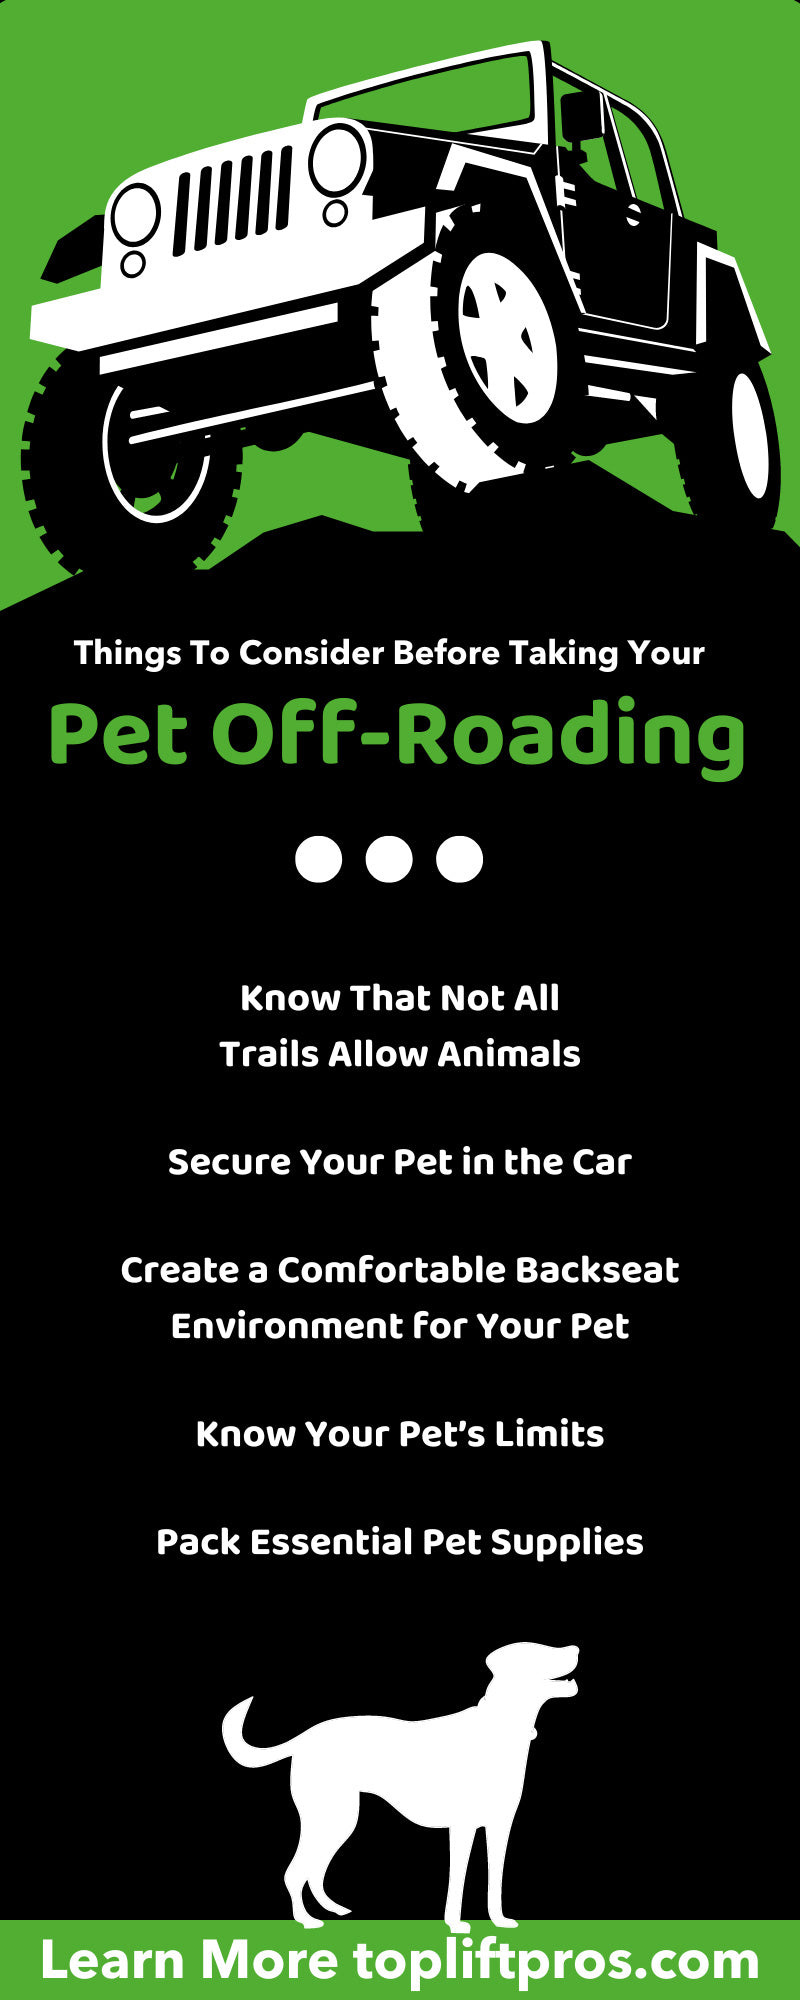 Things To Consider Before Taking Your Pet Off-Roading